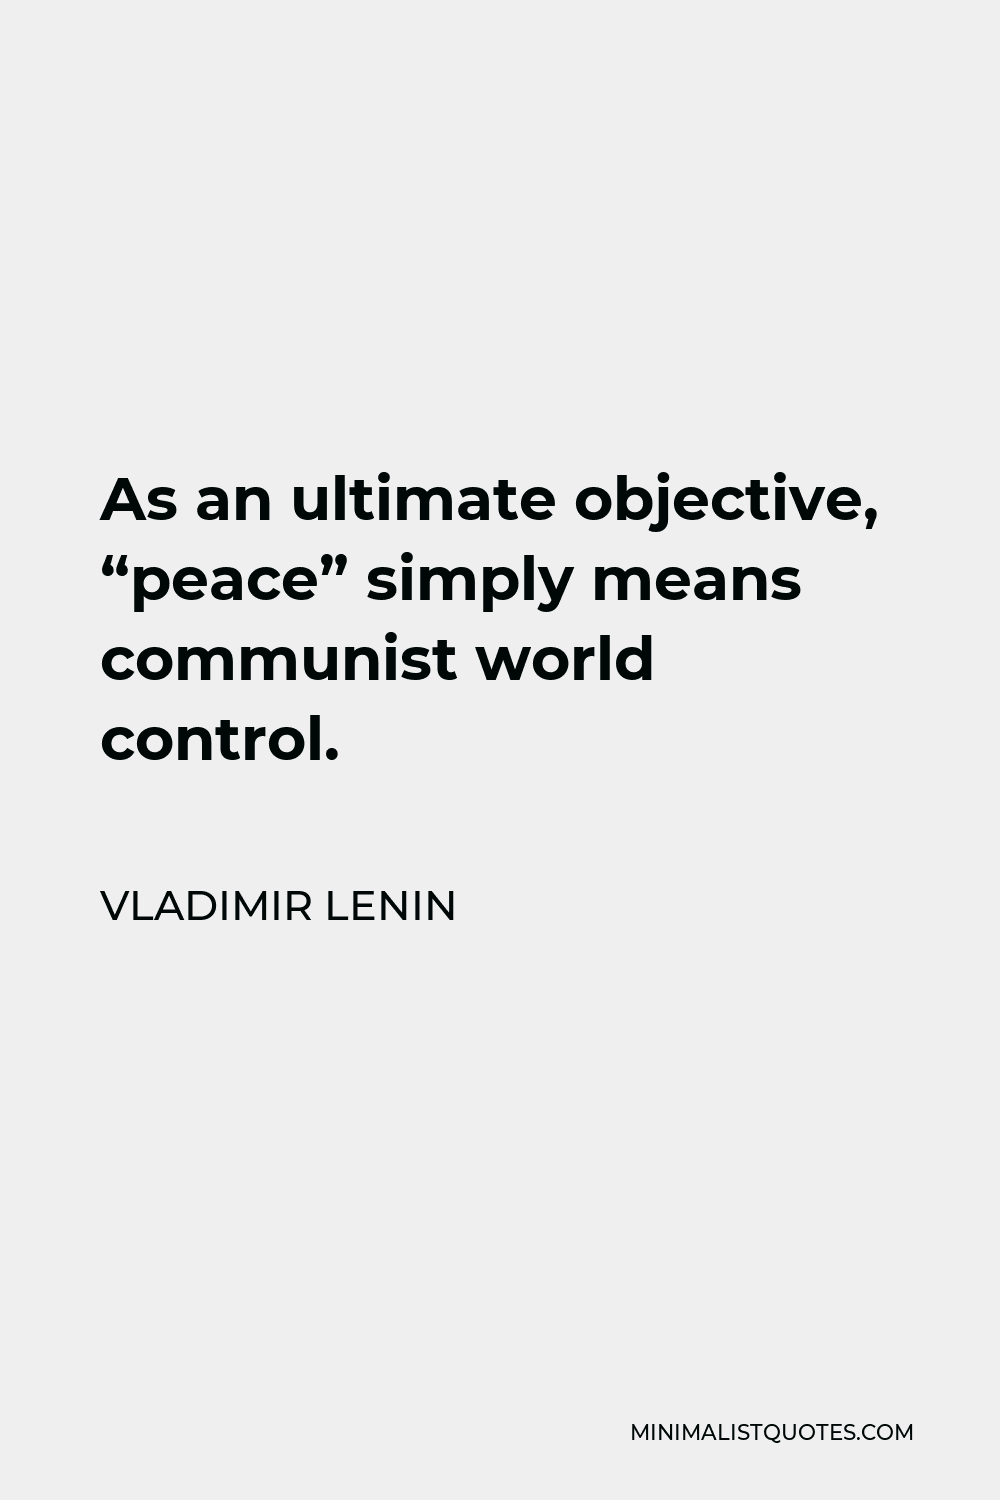 Vladimir Lenin Quote - As an ultimate objective, “peace” simply means communist world control.